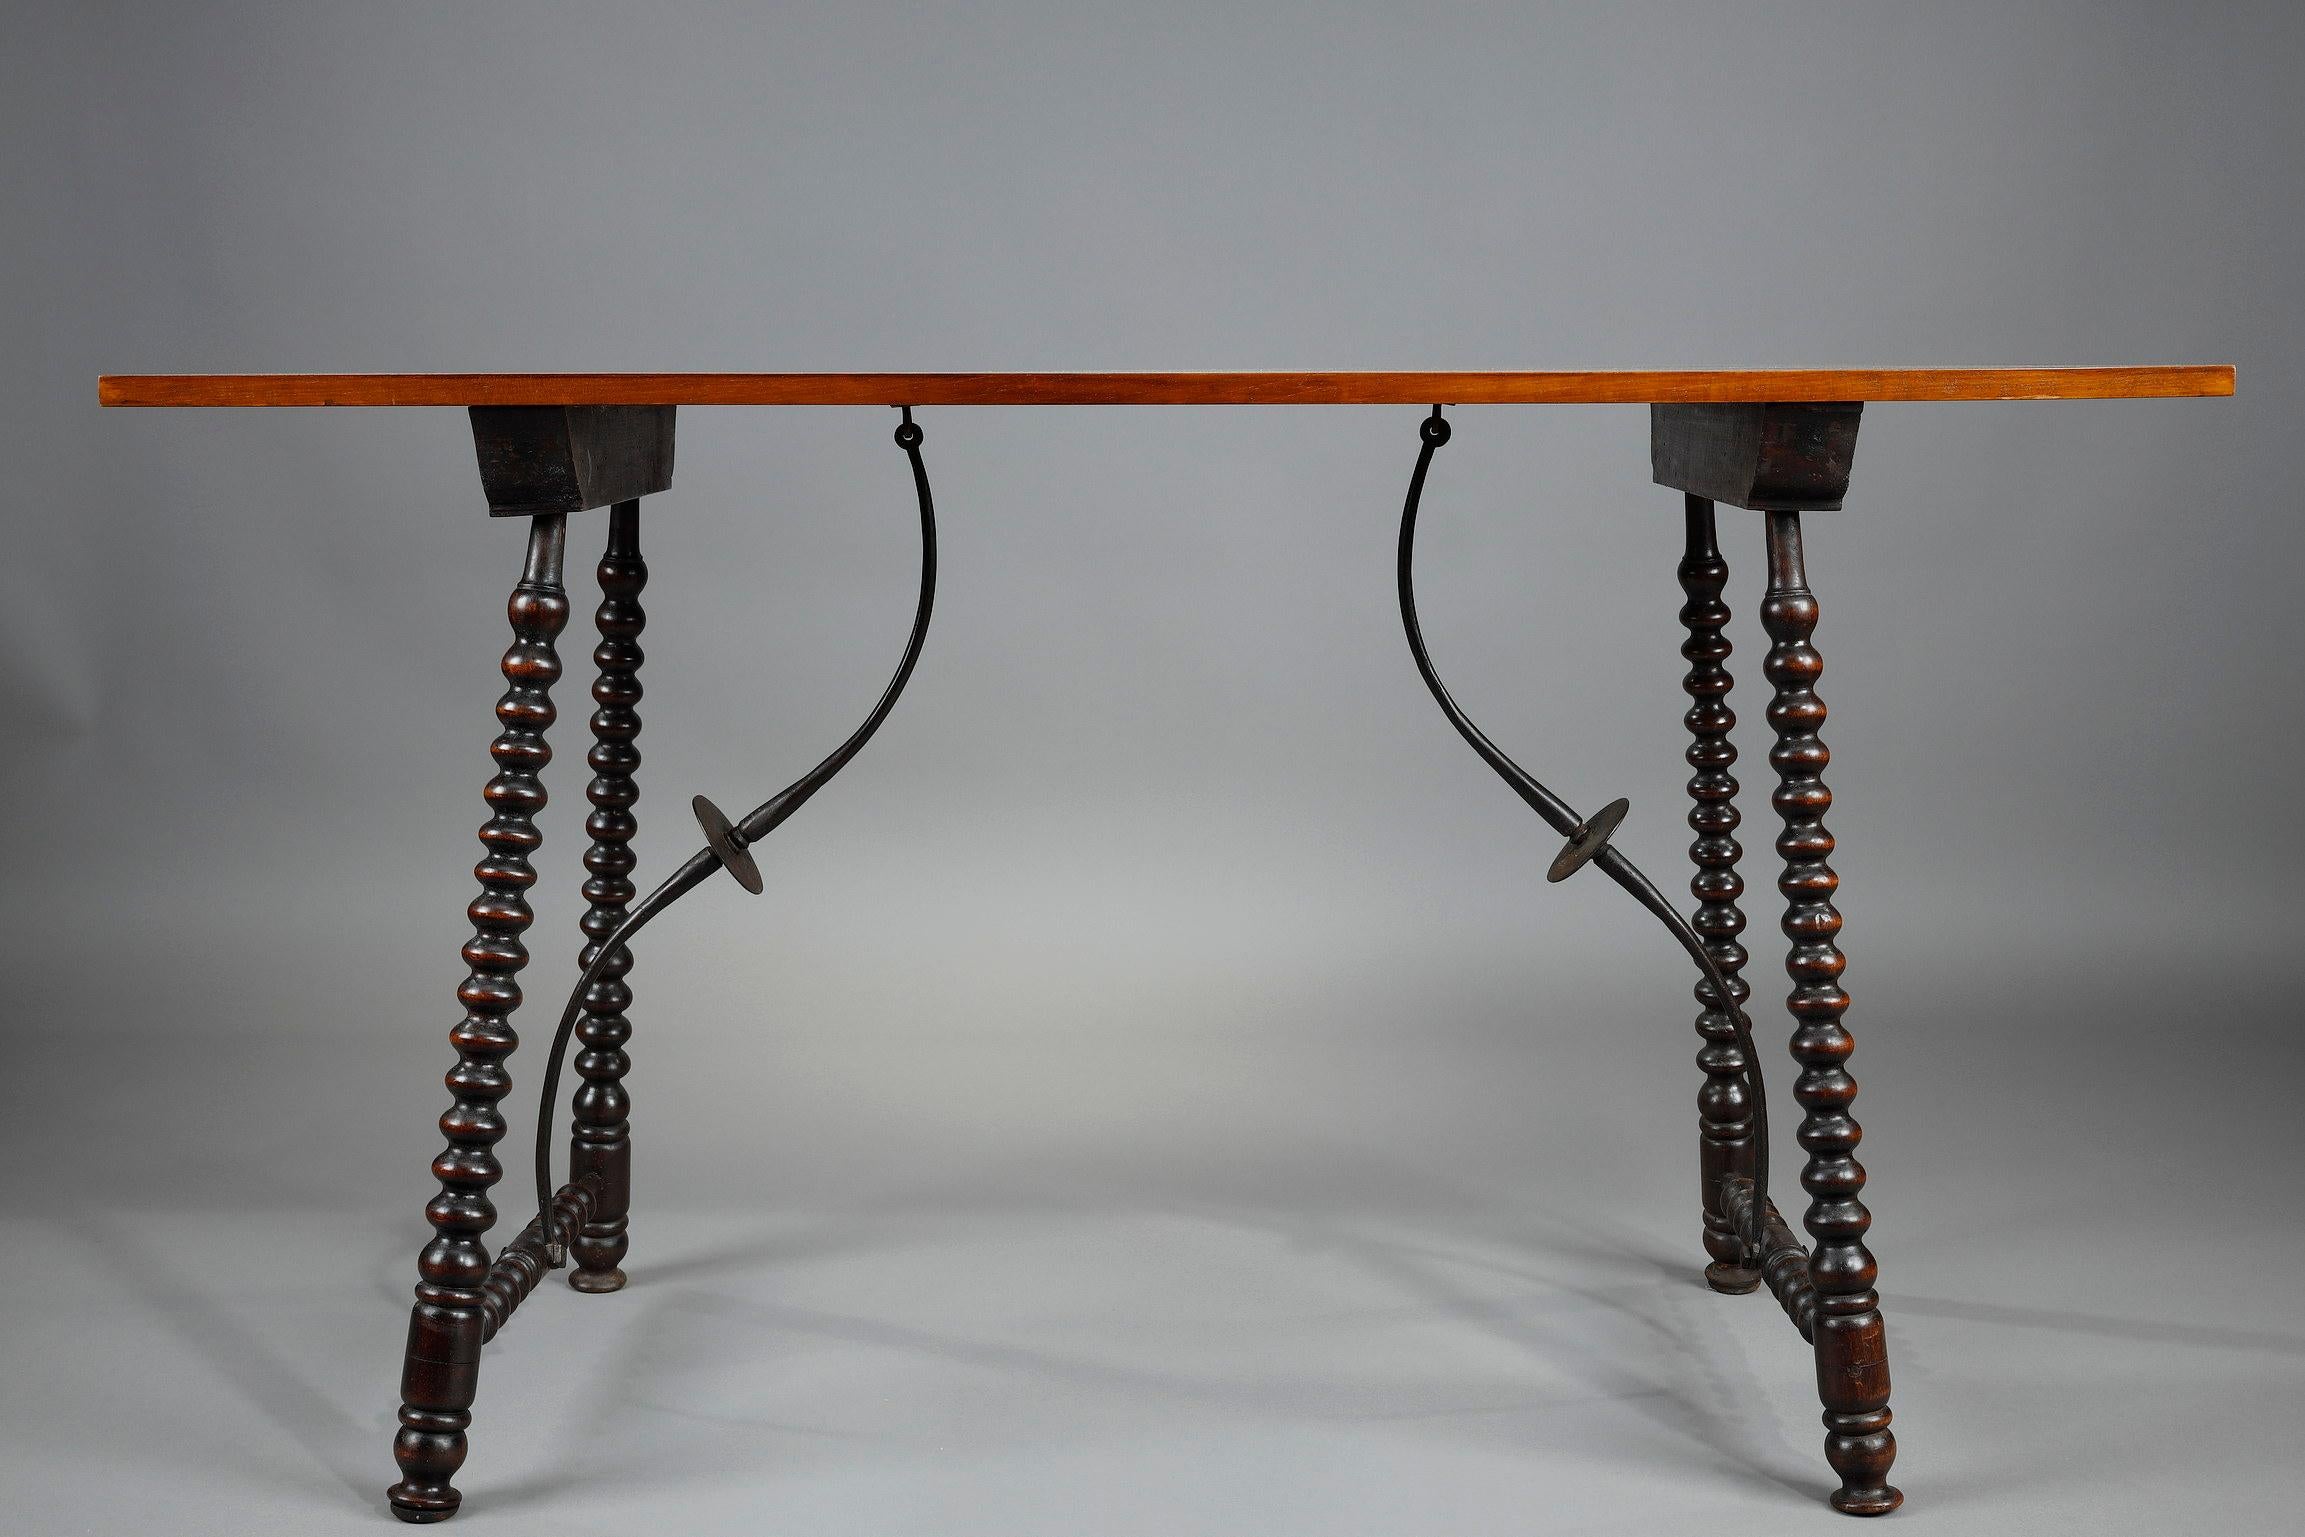 Console in the Spanish high period style in walnut veneer resting on oak legs carved in rosary. The whole is connected by wrought iron crosspieces, with elegant and sinuous lines, decorated with discs. Taking up classic forms, the console fits